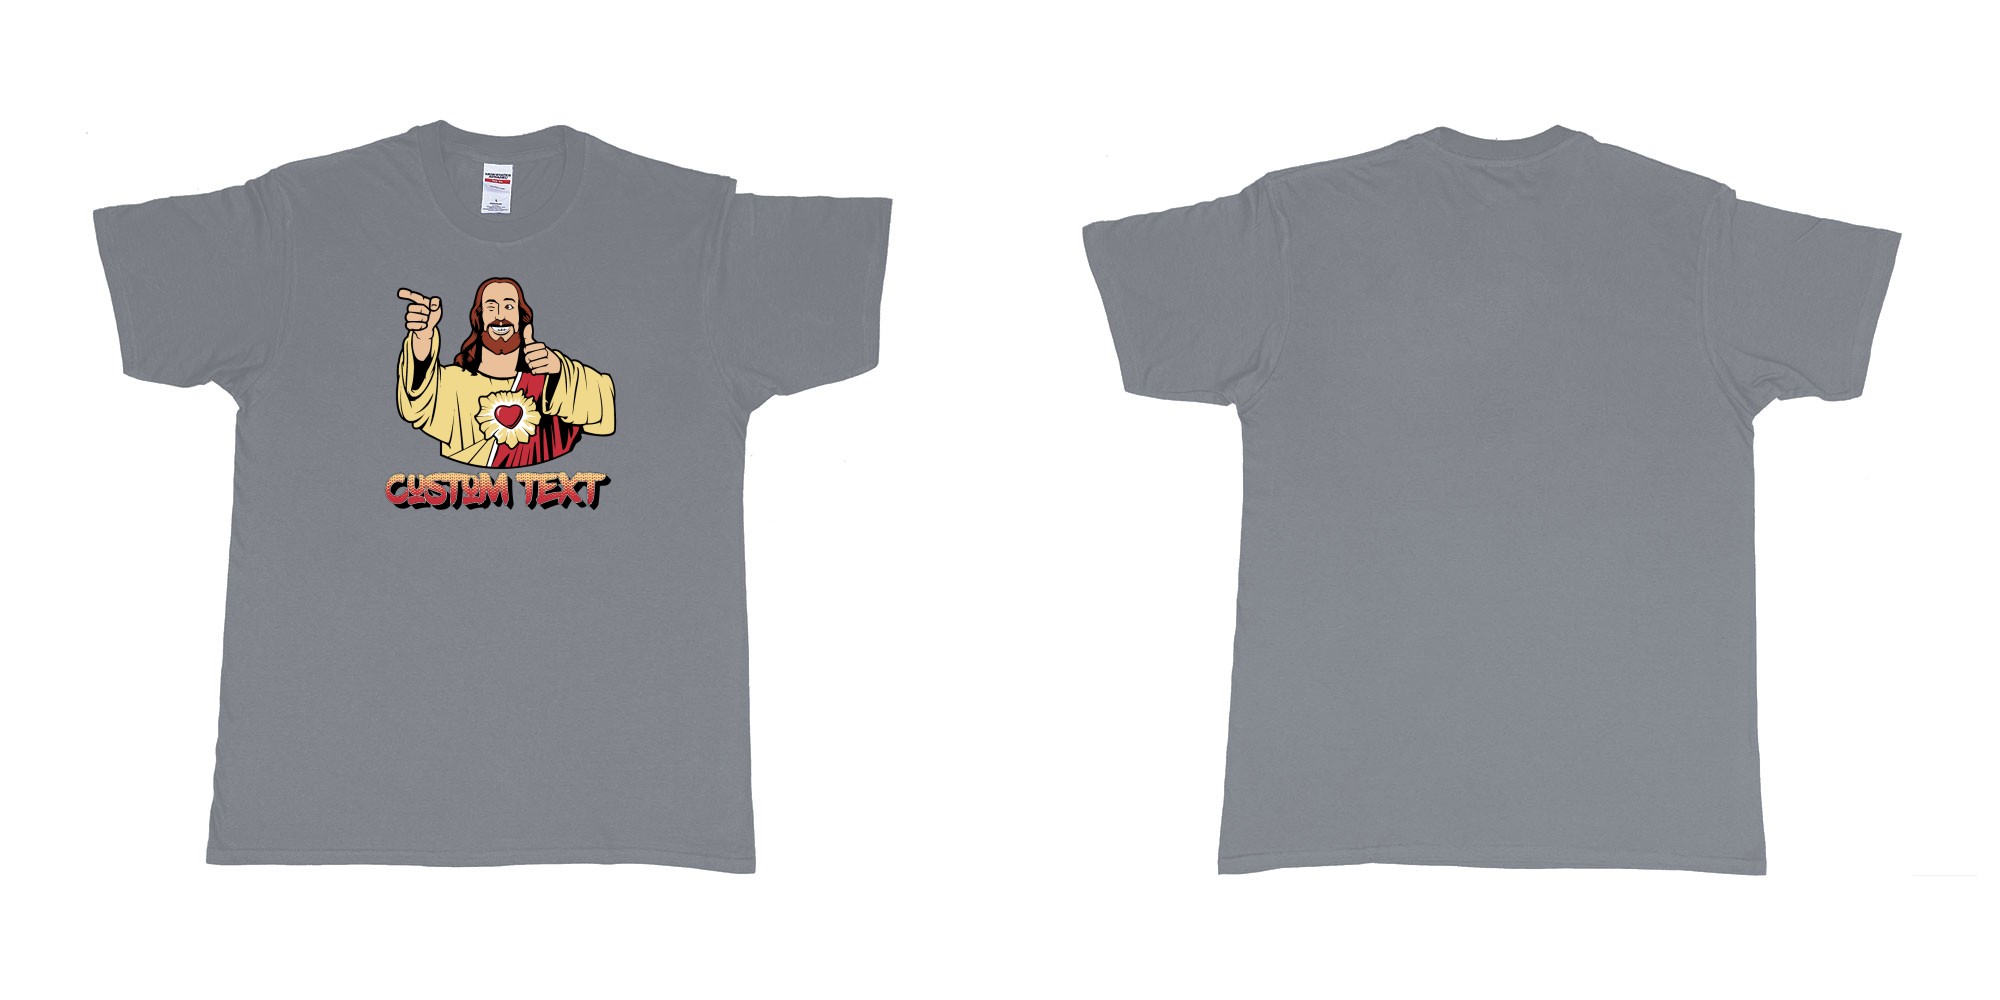 Custom tshirt design buddy christ custom text in fabric color misty choice your own text made in Bali by The Pirate Way